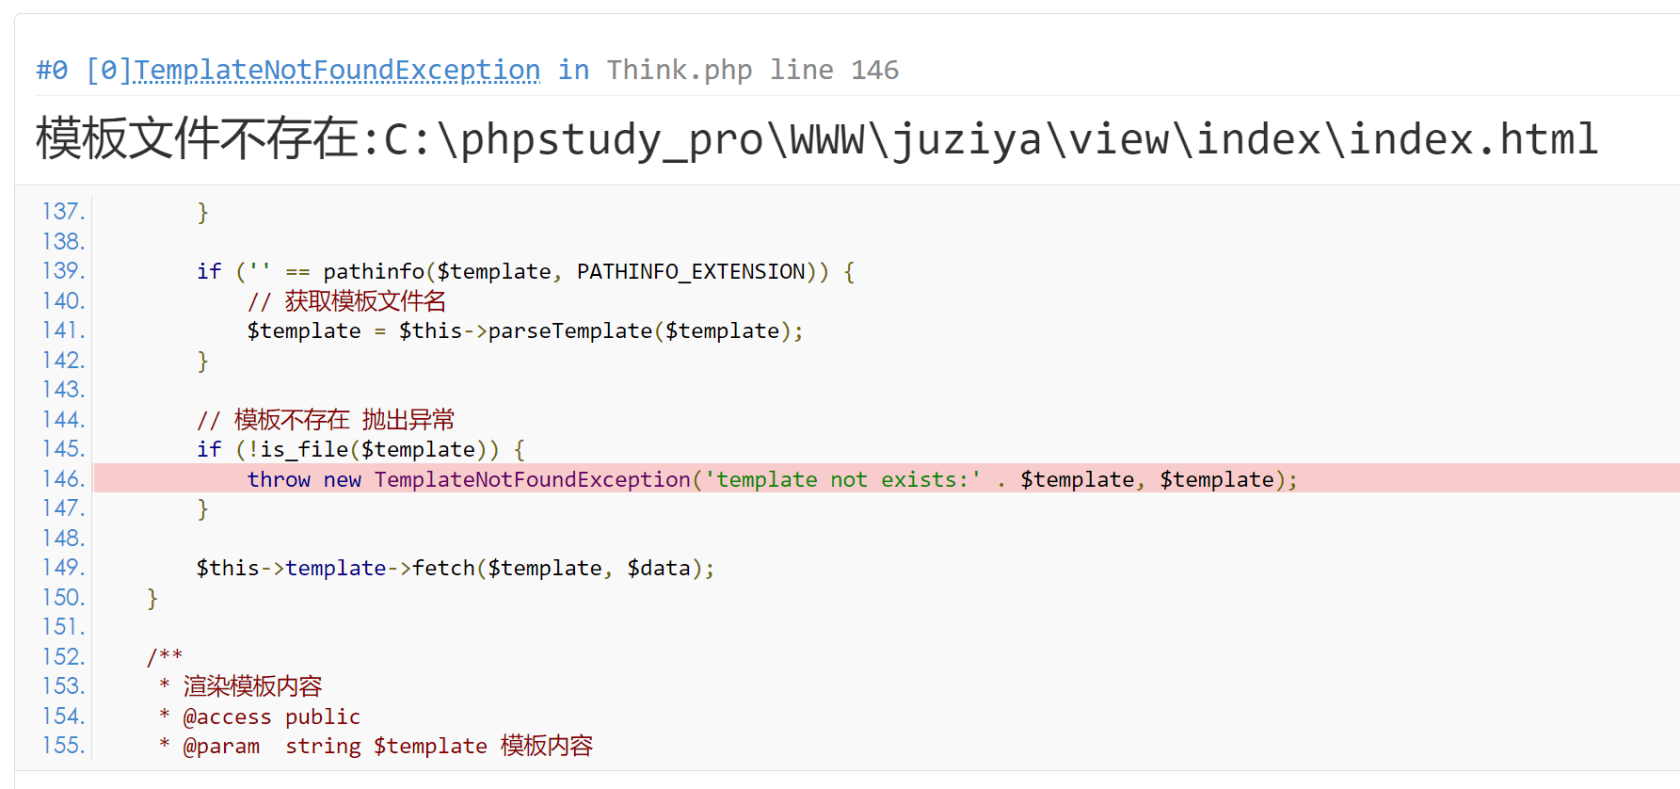 ThinkPHP 6.0 安装 thinkTemplate 模板引擎（报错：Driver [Think] not supported. ）